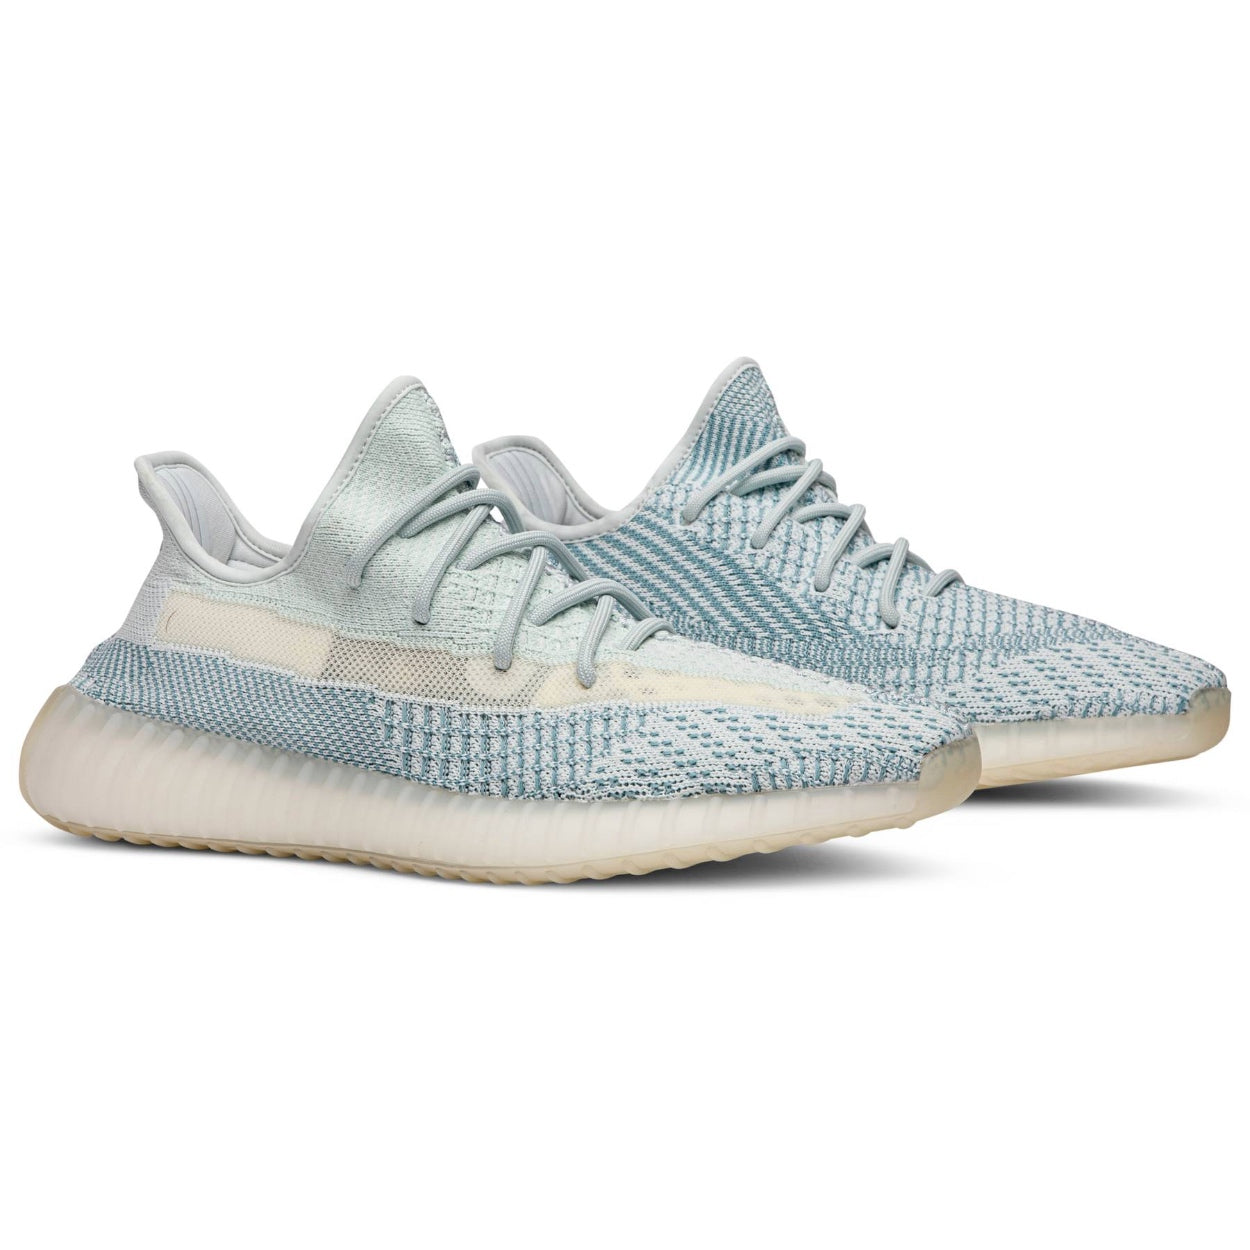 adidas Yeezy Boost 350 V2 'Cloud White Reflective' - After Burn